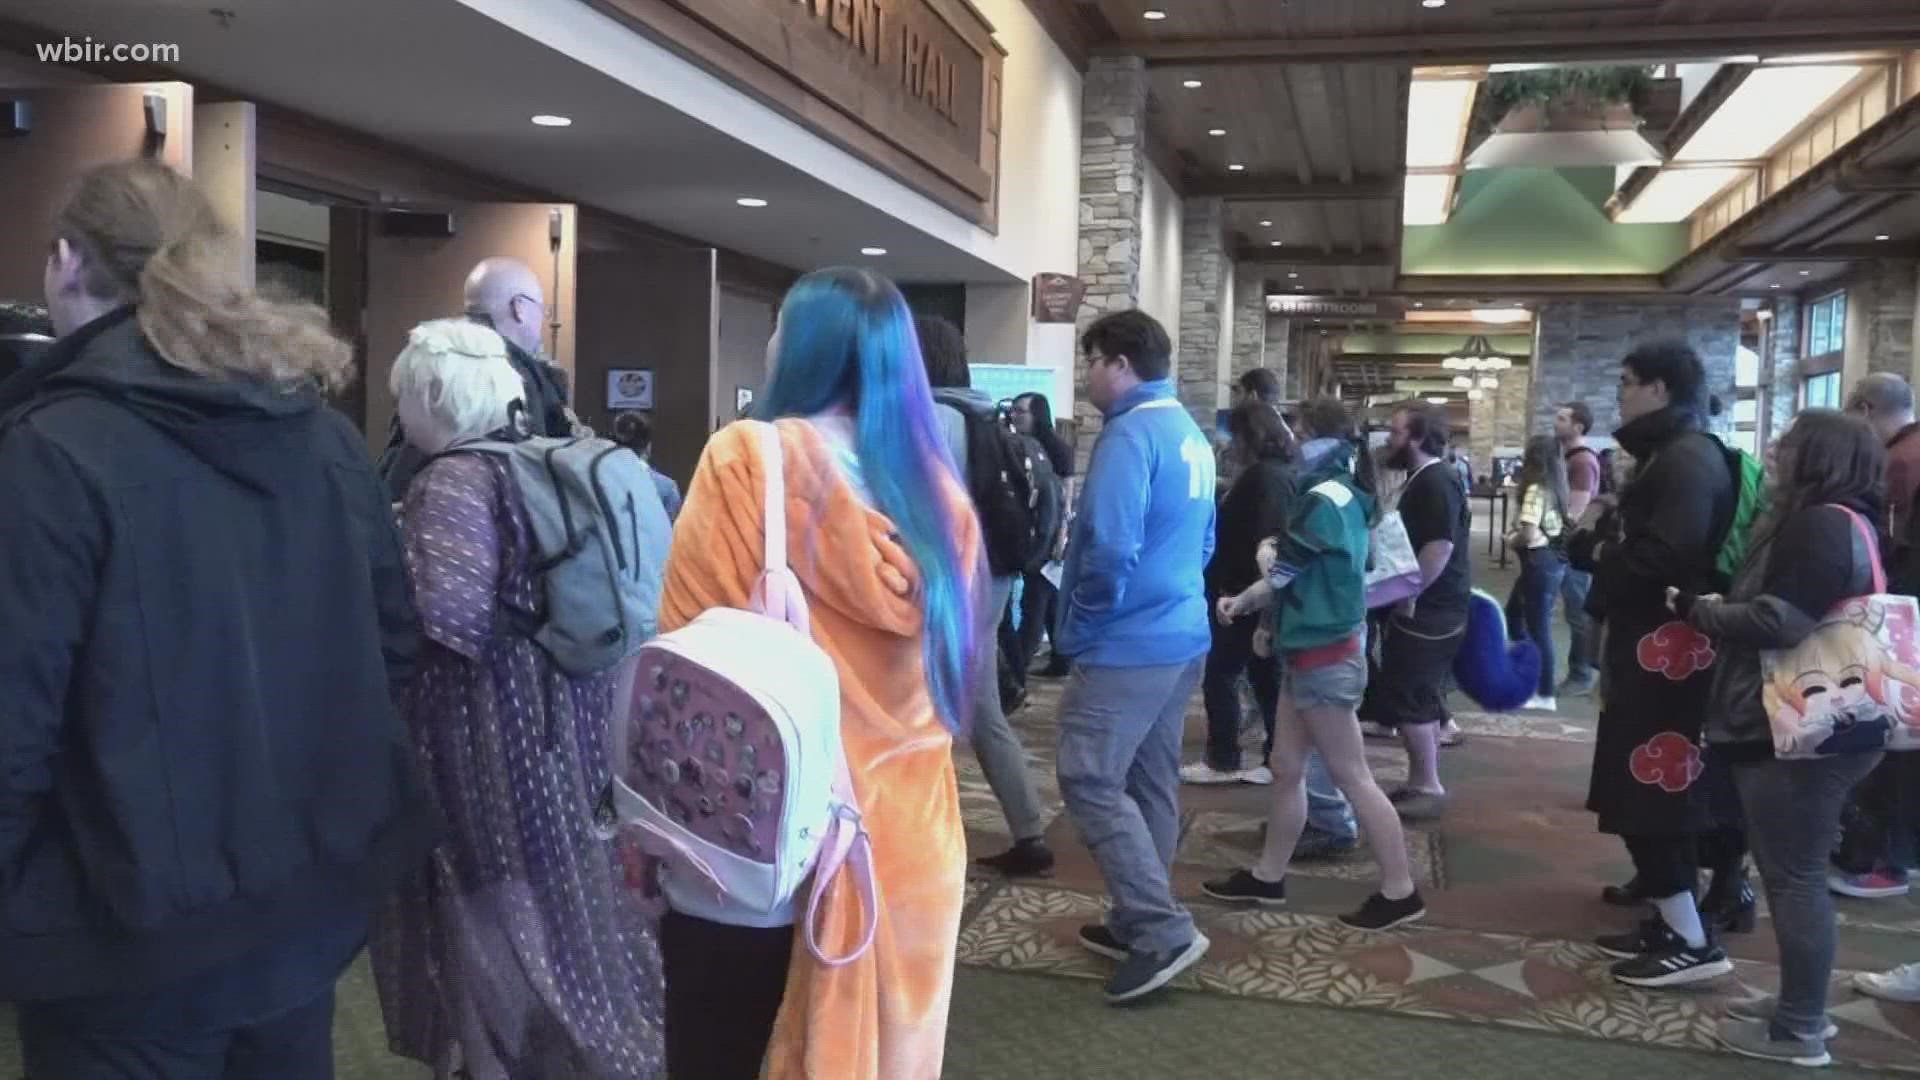 The Yama-Con Anime and Comic Convention is in its 9th year and this year's event started Friday, lasting through the weekend.